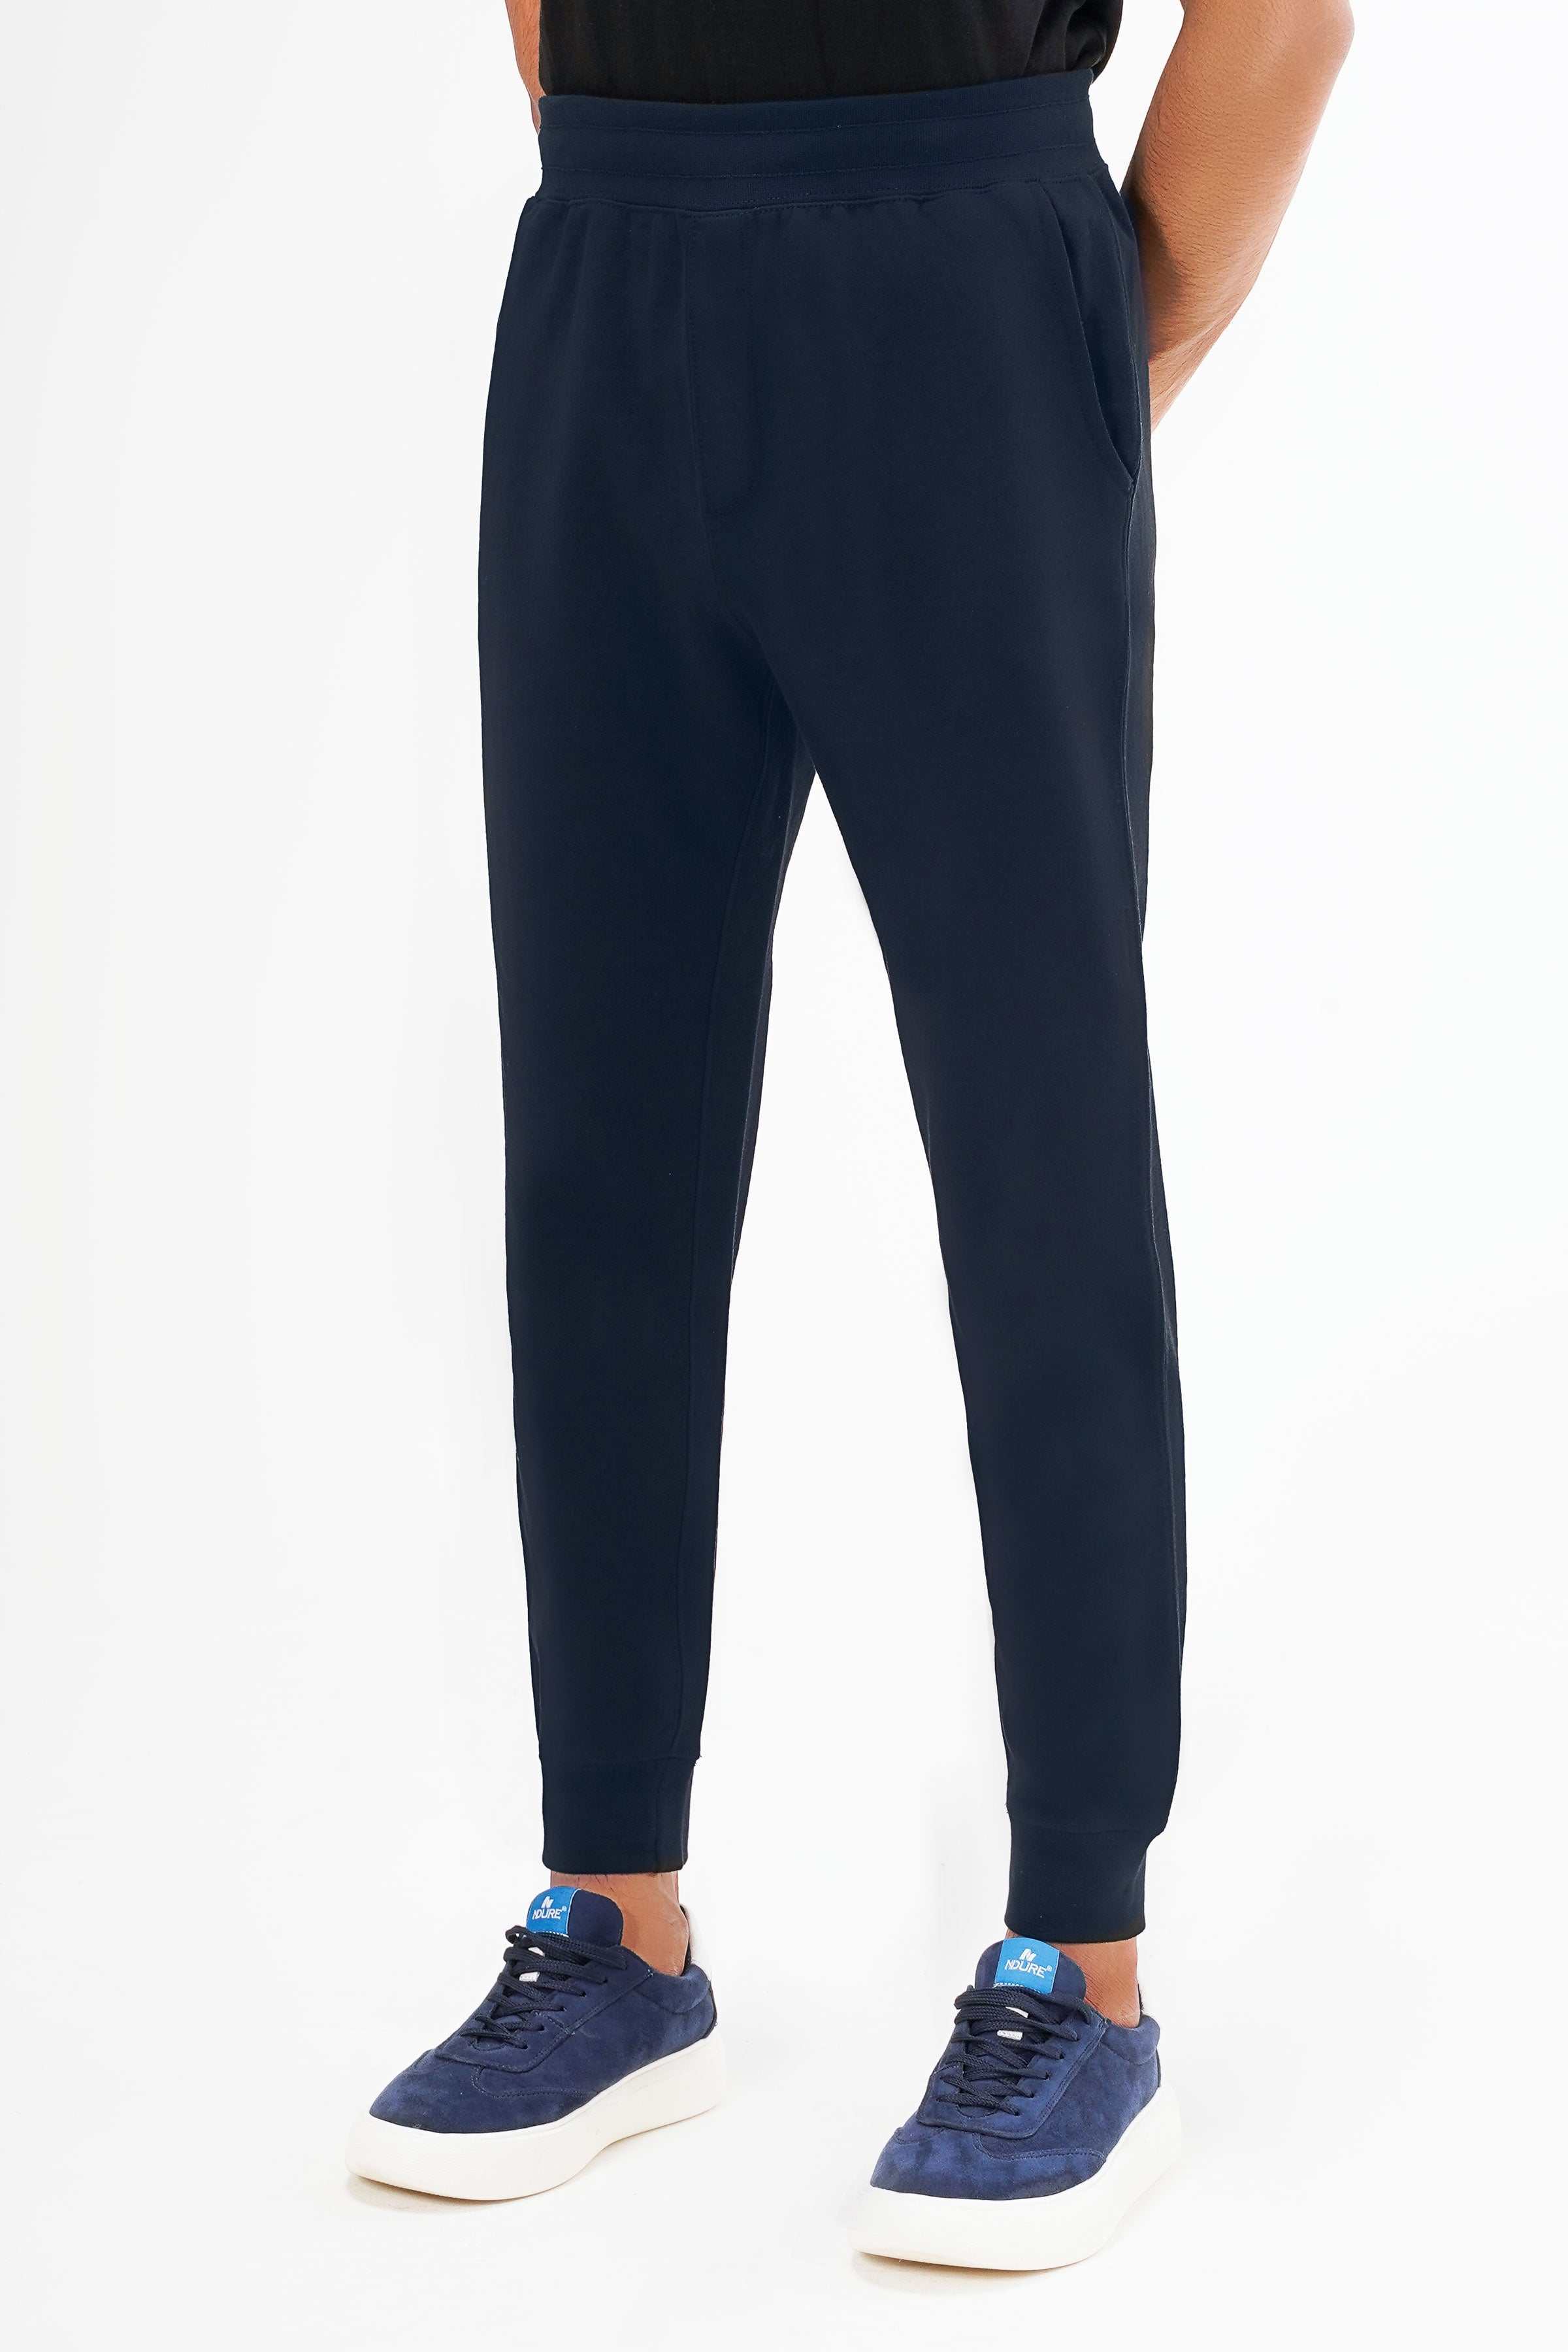 TERRY JOGGER TROUSER NAVY at Charcoal Clothing